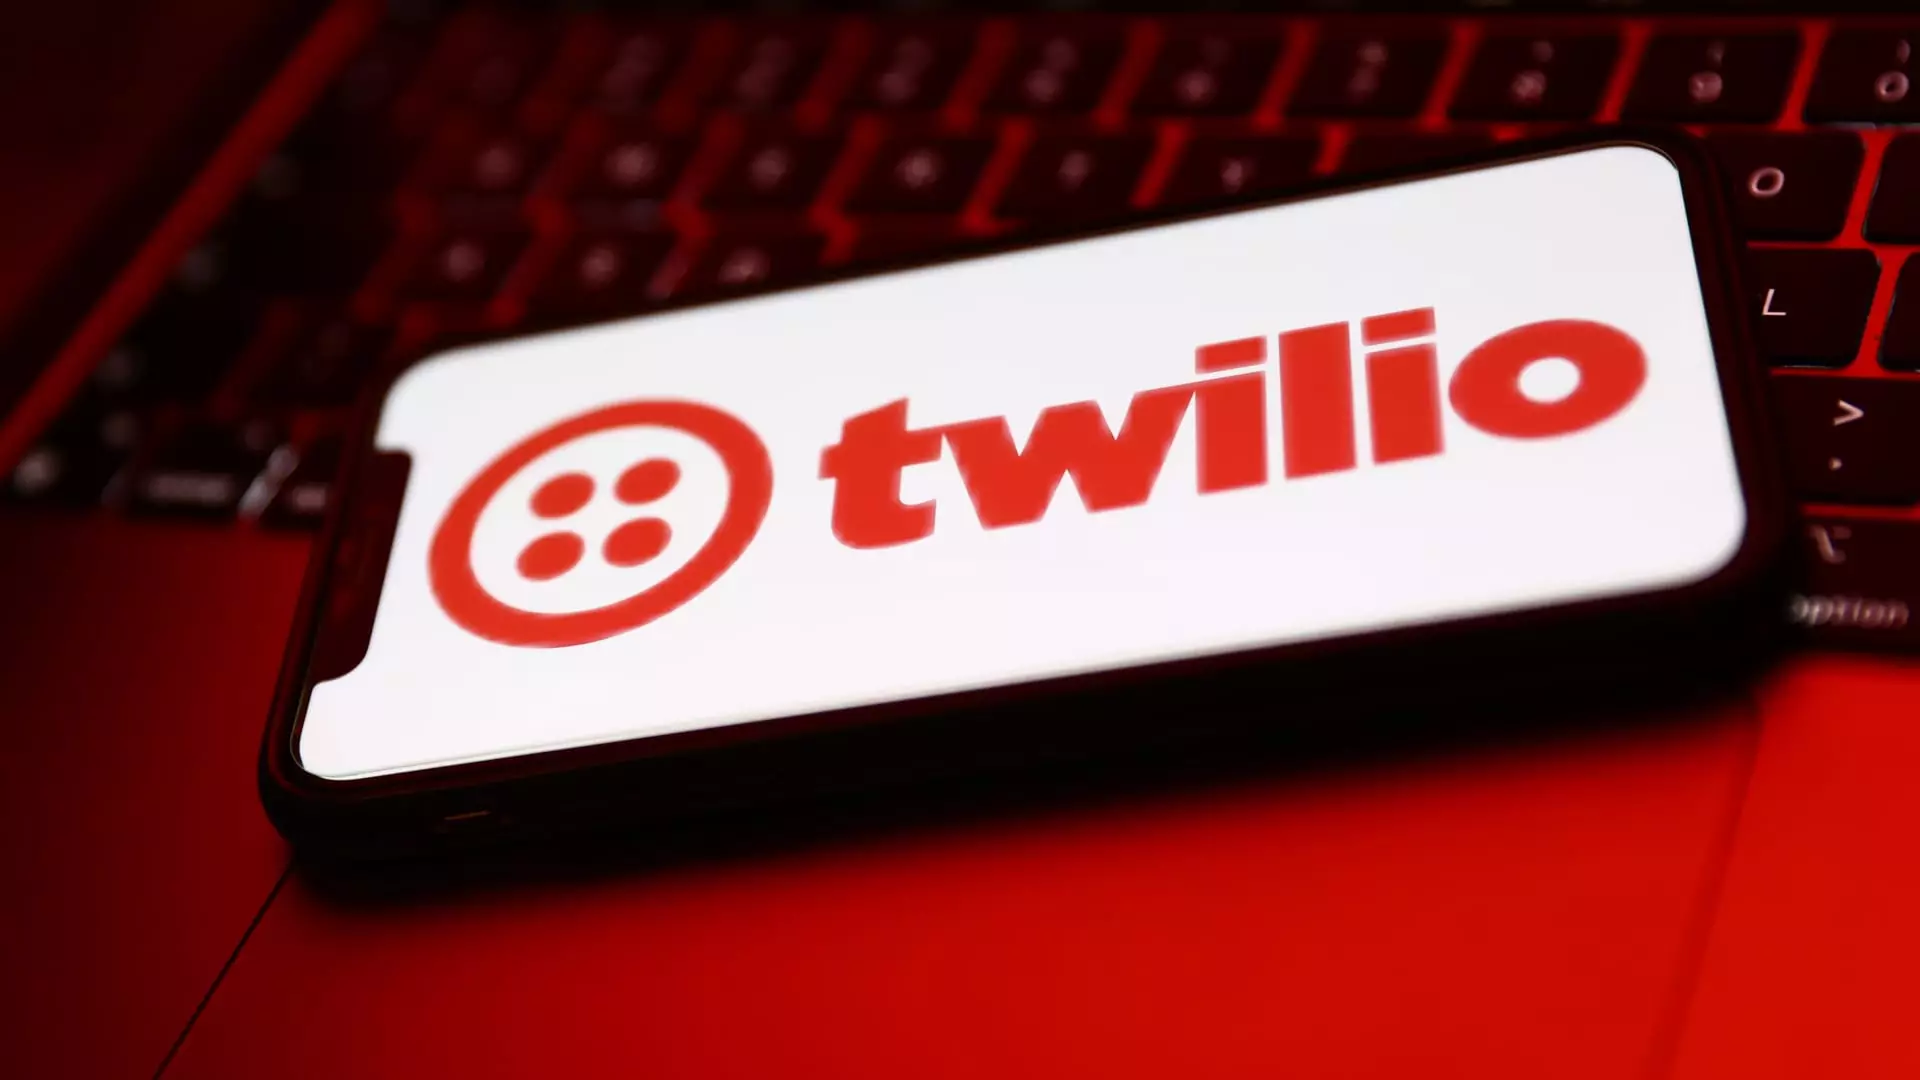 Analysis and Critique of Twilio: A Deep Dive into the Company’s Activist Engagement